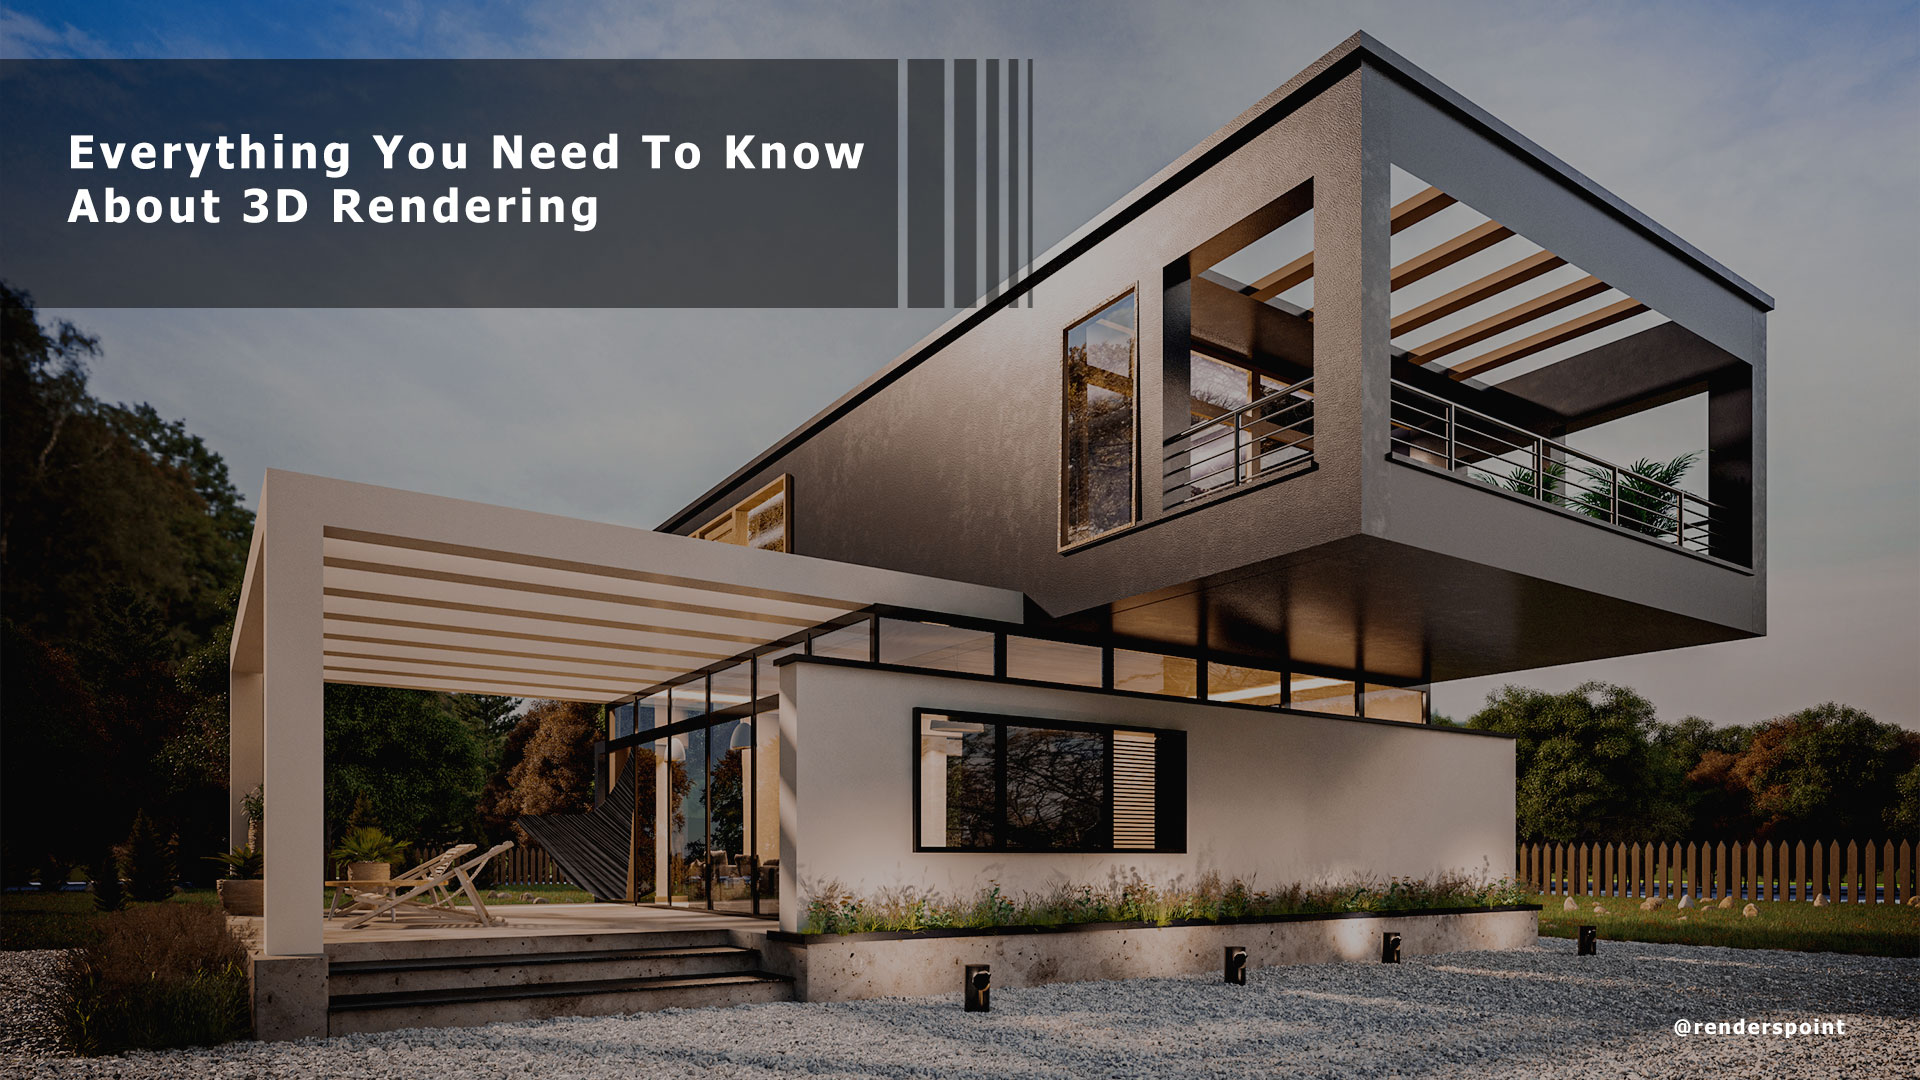 Everything You Need To Know About 3D Rendering